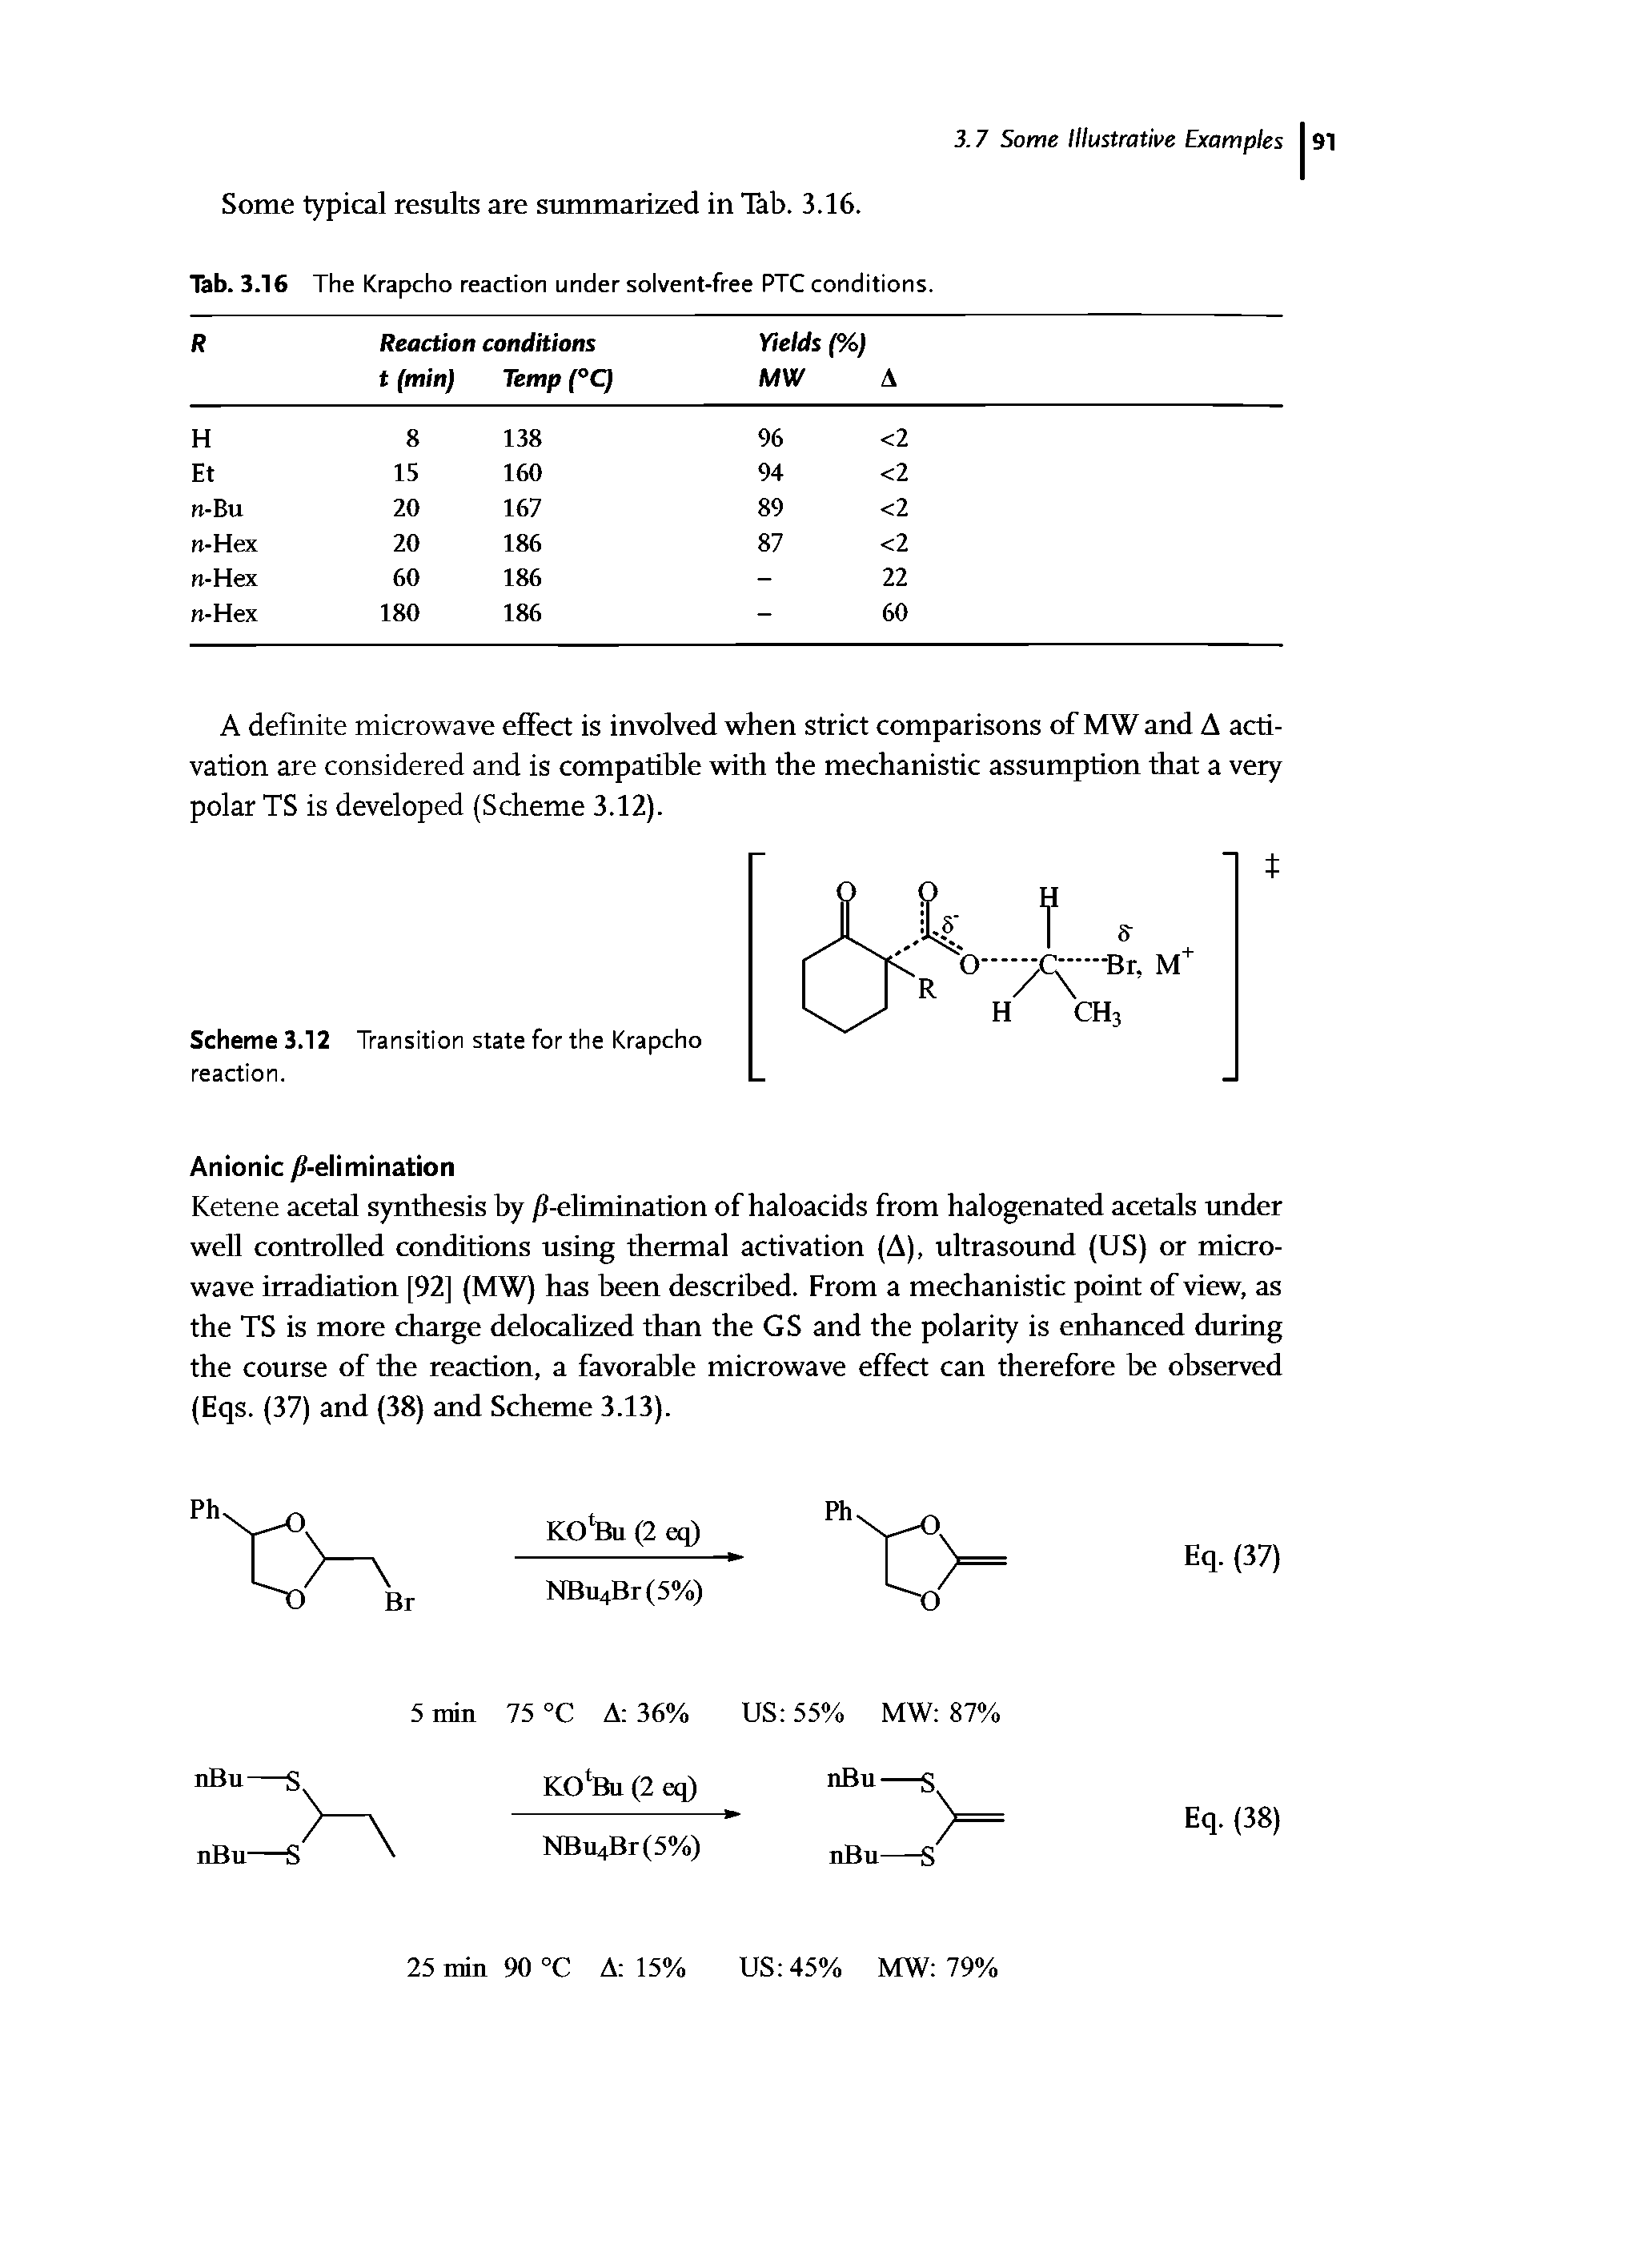 Tab. 3.16 The Krapcho reaction under solvent-free PTC conditions.